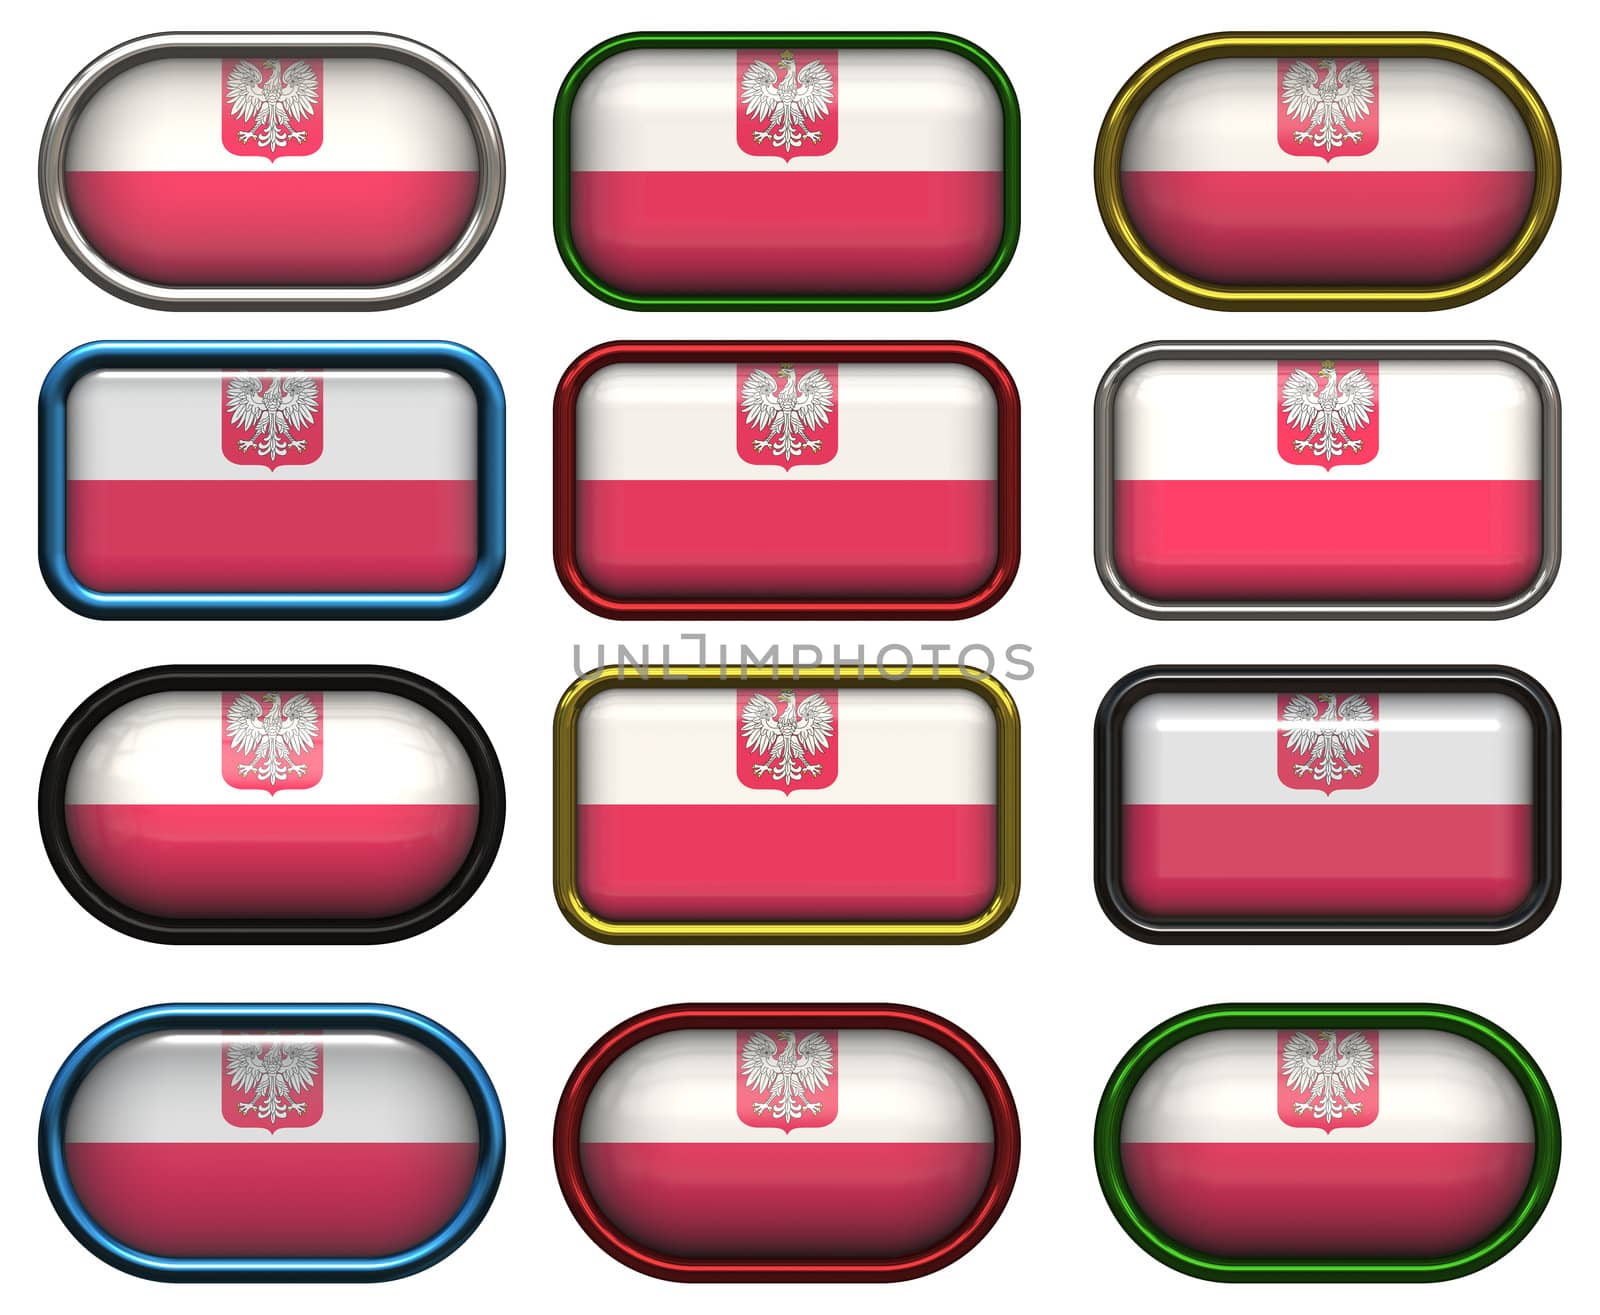 twelve Great buttons of the Flag of Poland